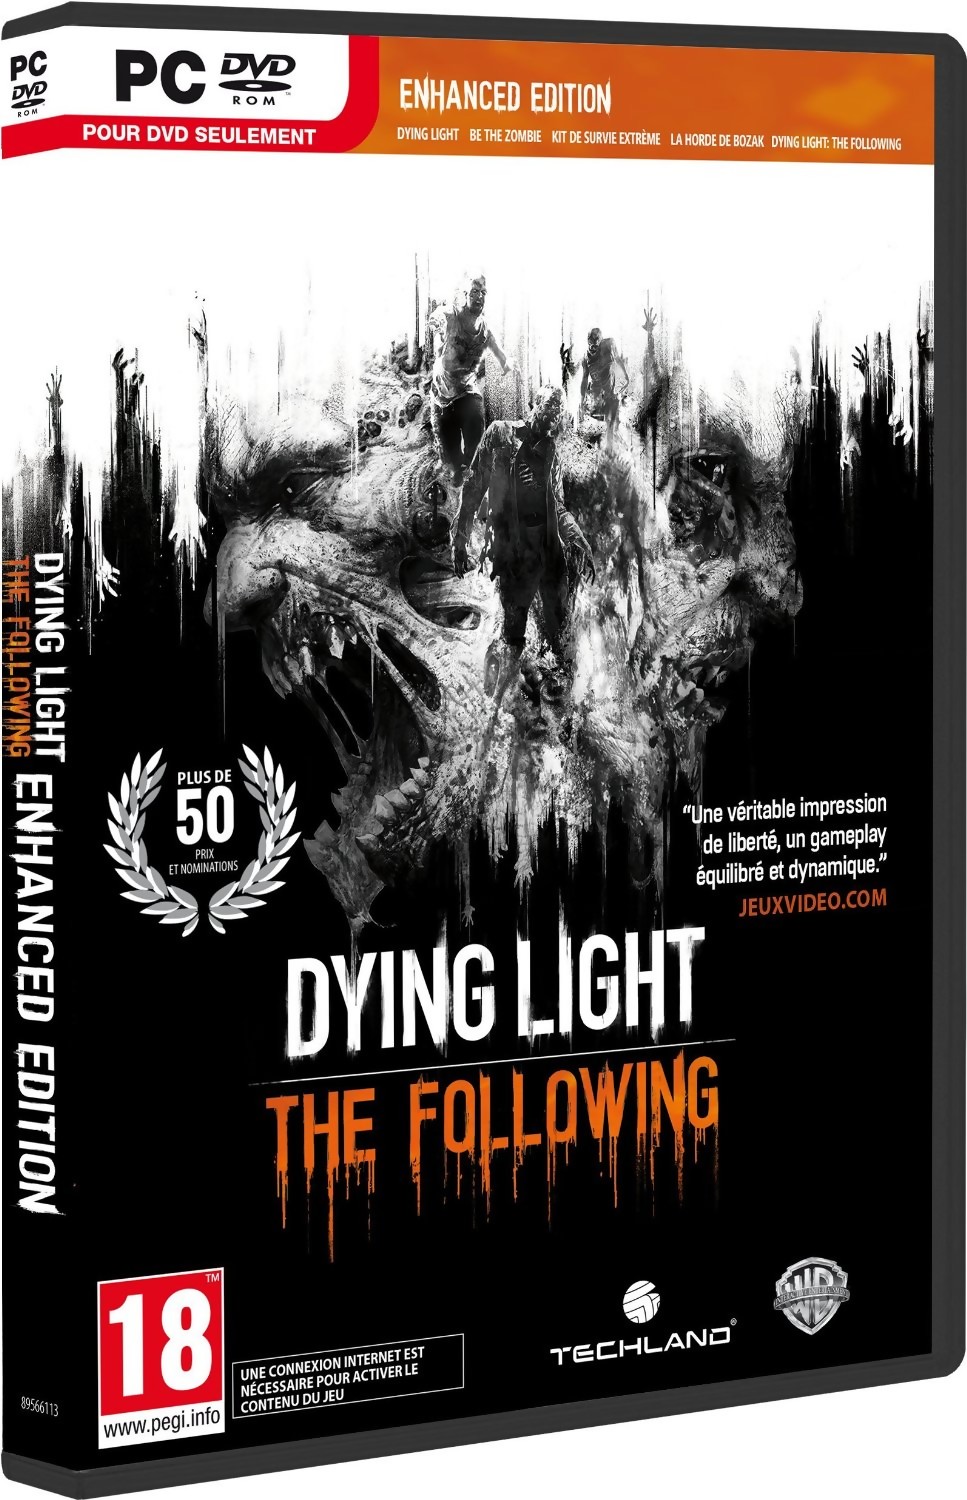 Dying Light The Following Enhanced Edition PC Game